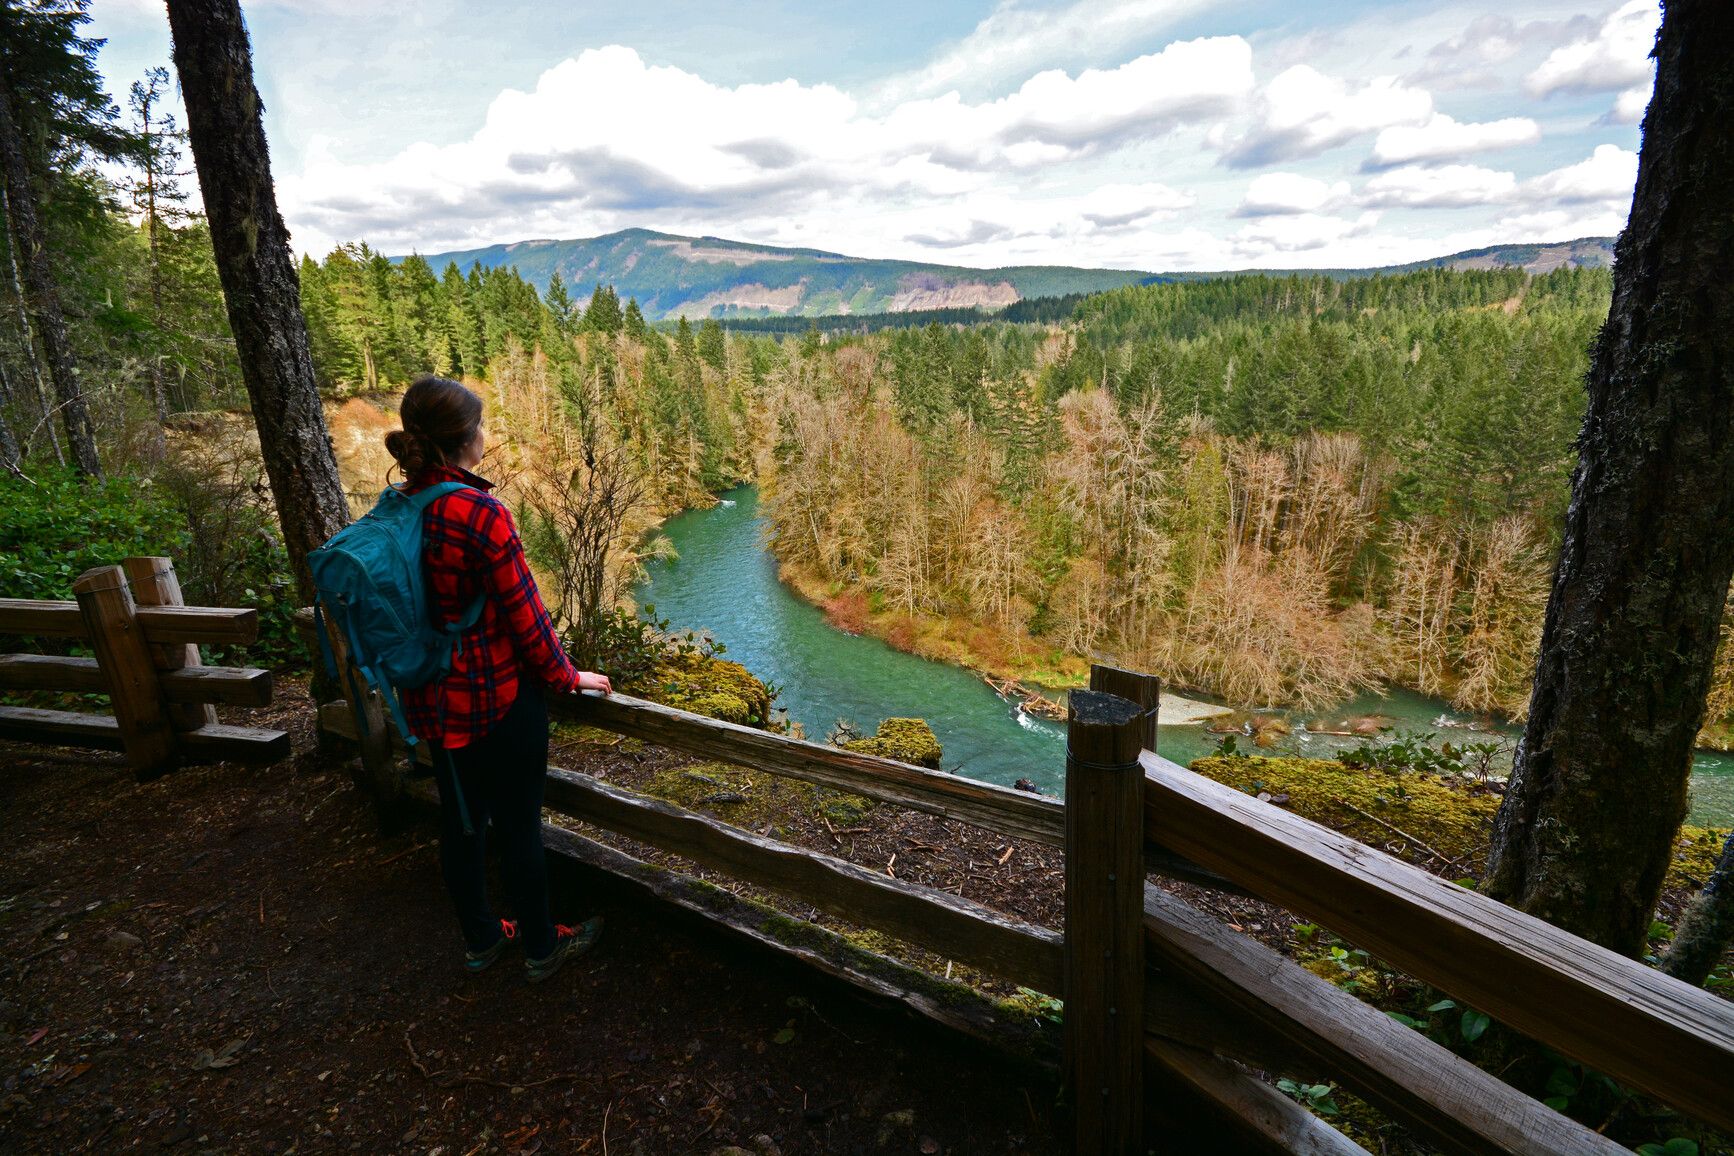 Viewing the river and valley from a lookout point in Cowichan River Park.